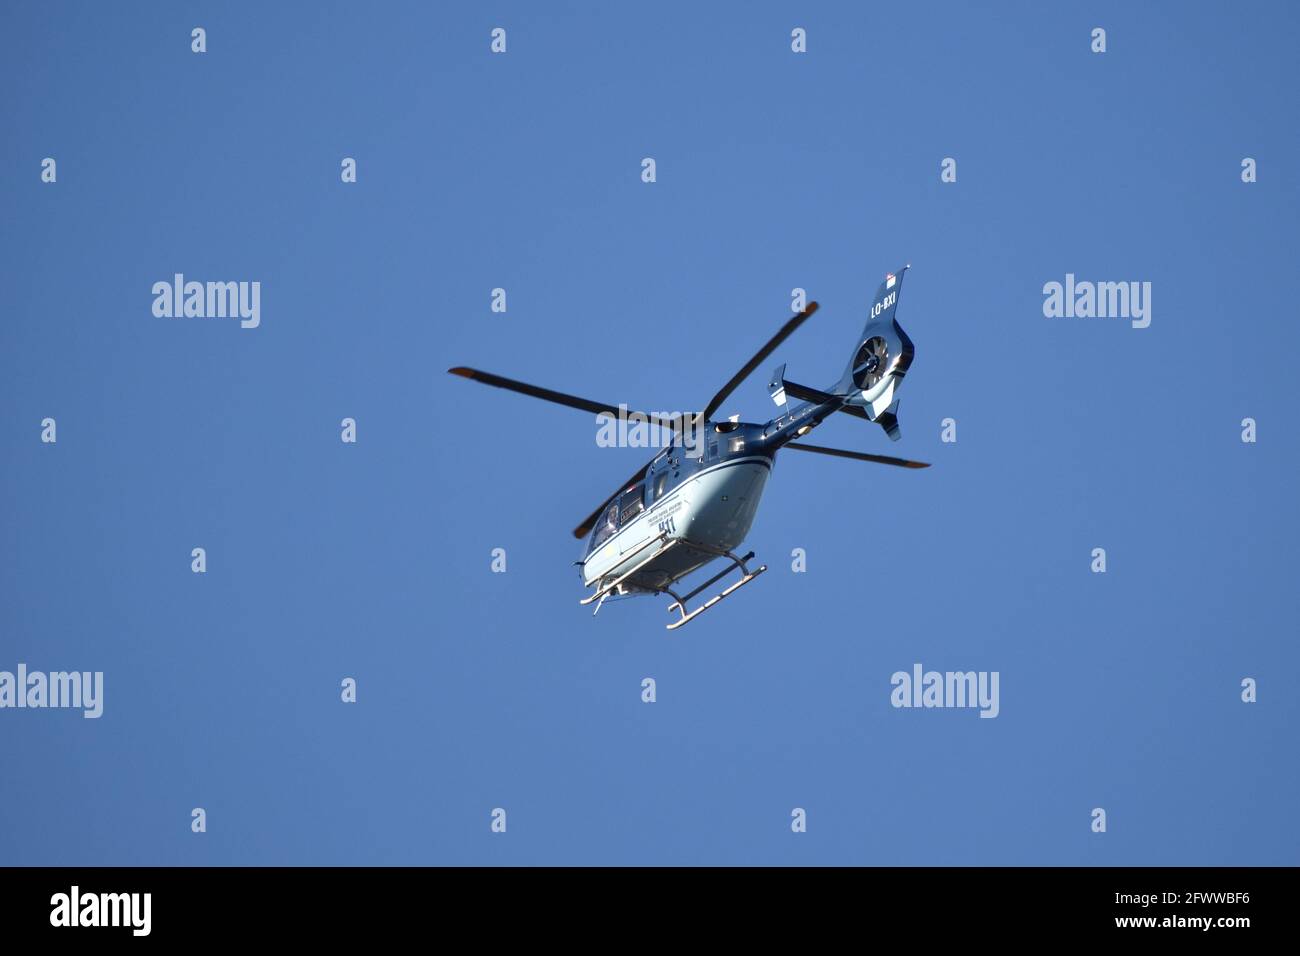 Buenos Aires, Argentina - September 28, 2020: Helicopter Airbus EC-135, tail number LQ-BXI, in flight. It is used by the Police of Argentina Stock Photo